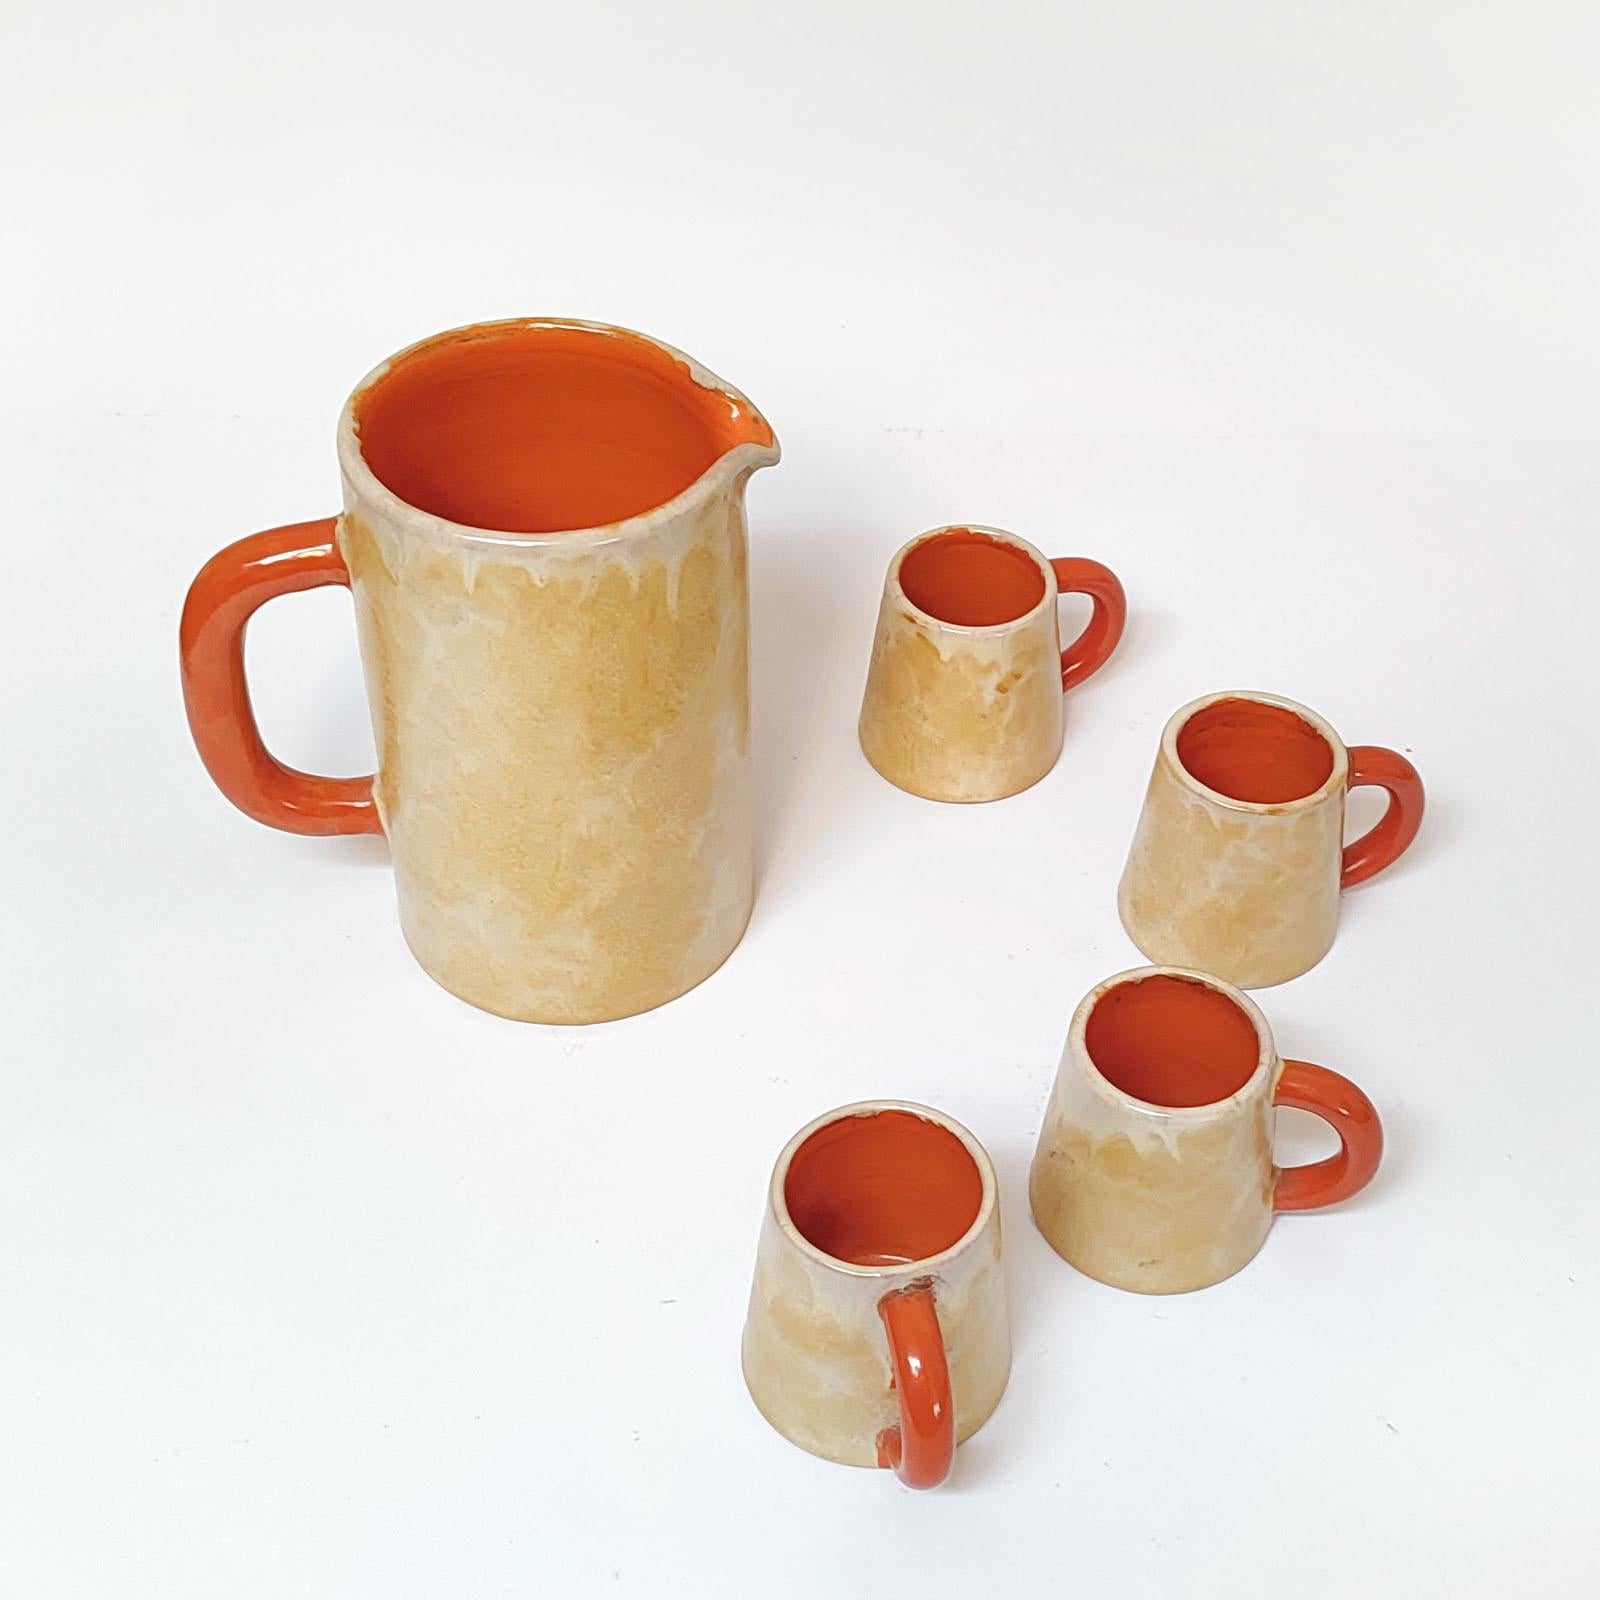 Stoneware Ceramic Collection of Vessels, Anna-Lisa Thomson for Upsala-Ekeby, Sweden 1930s For Sale